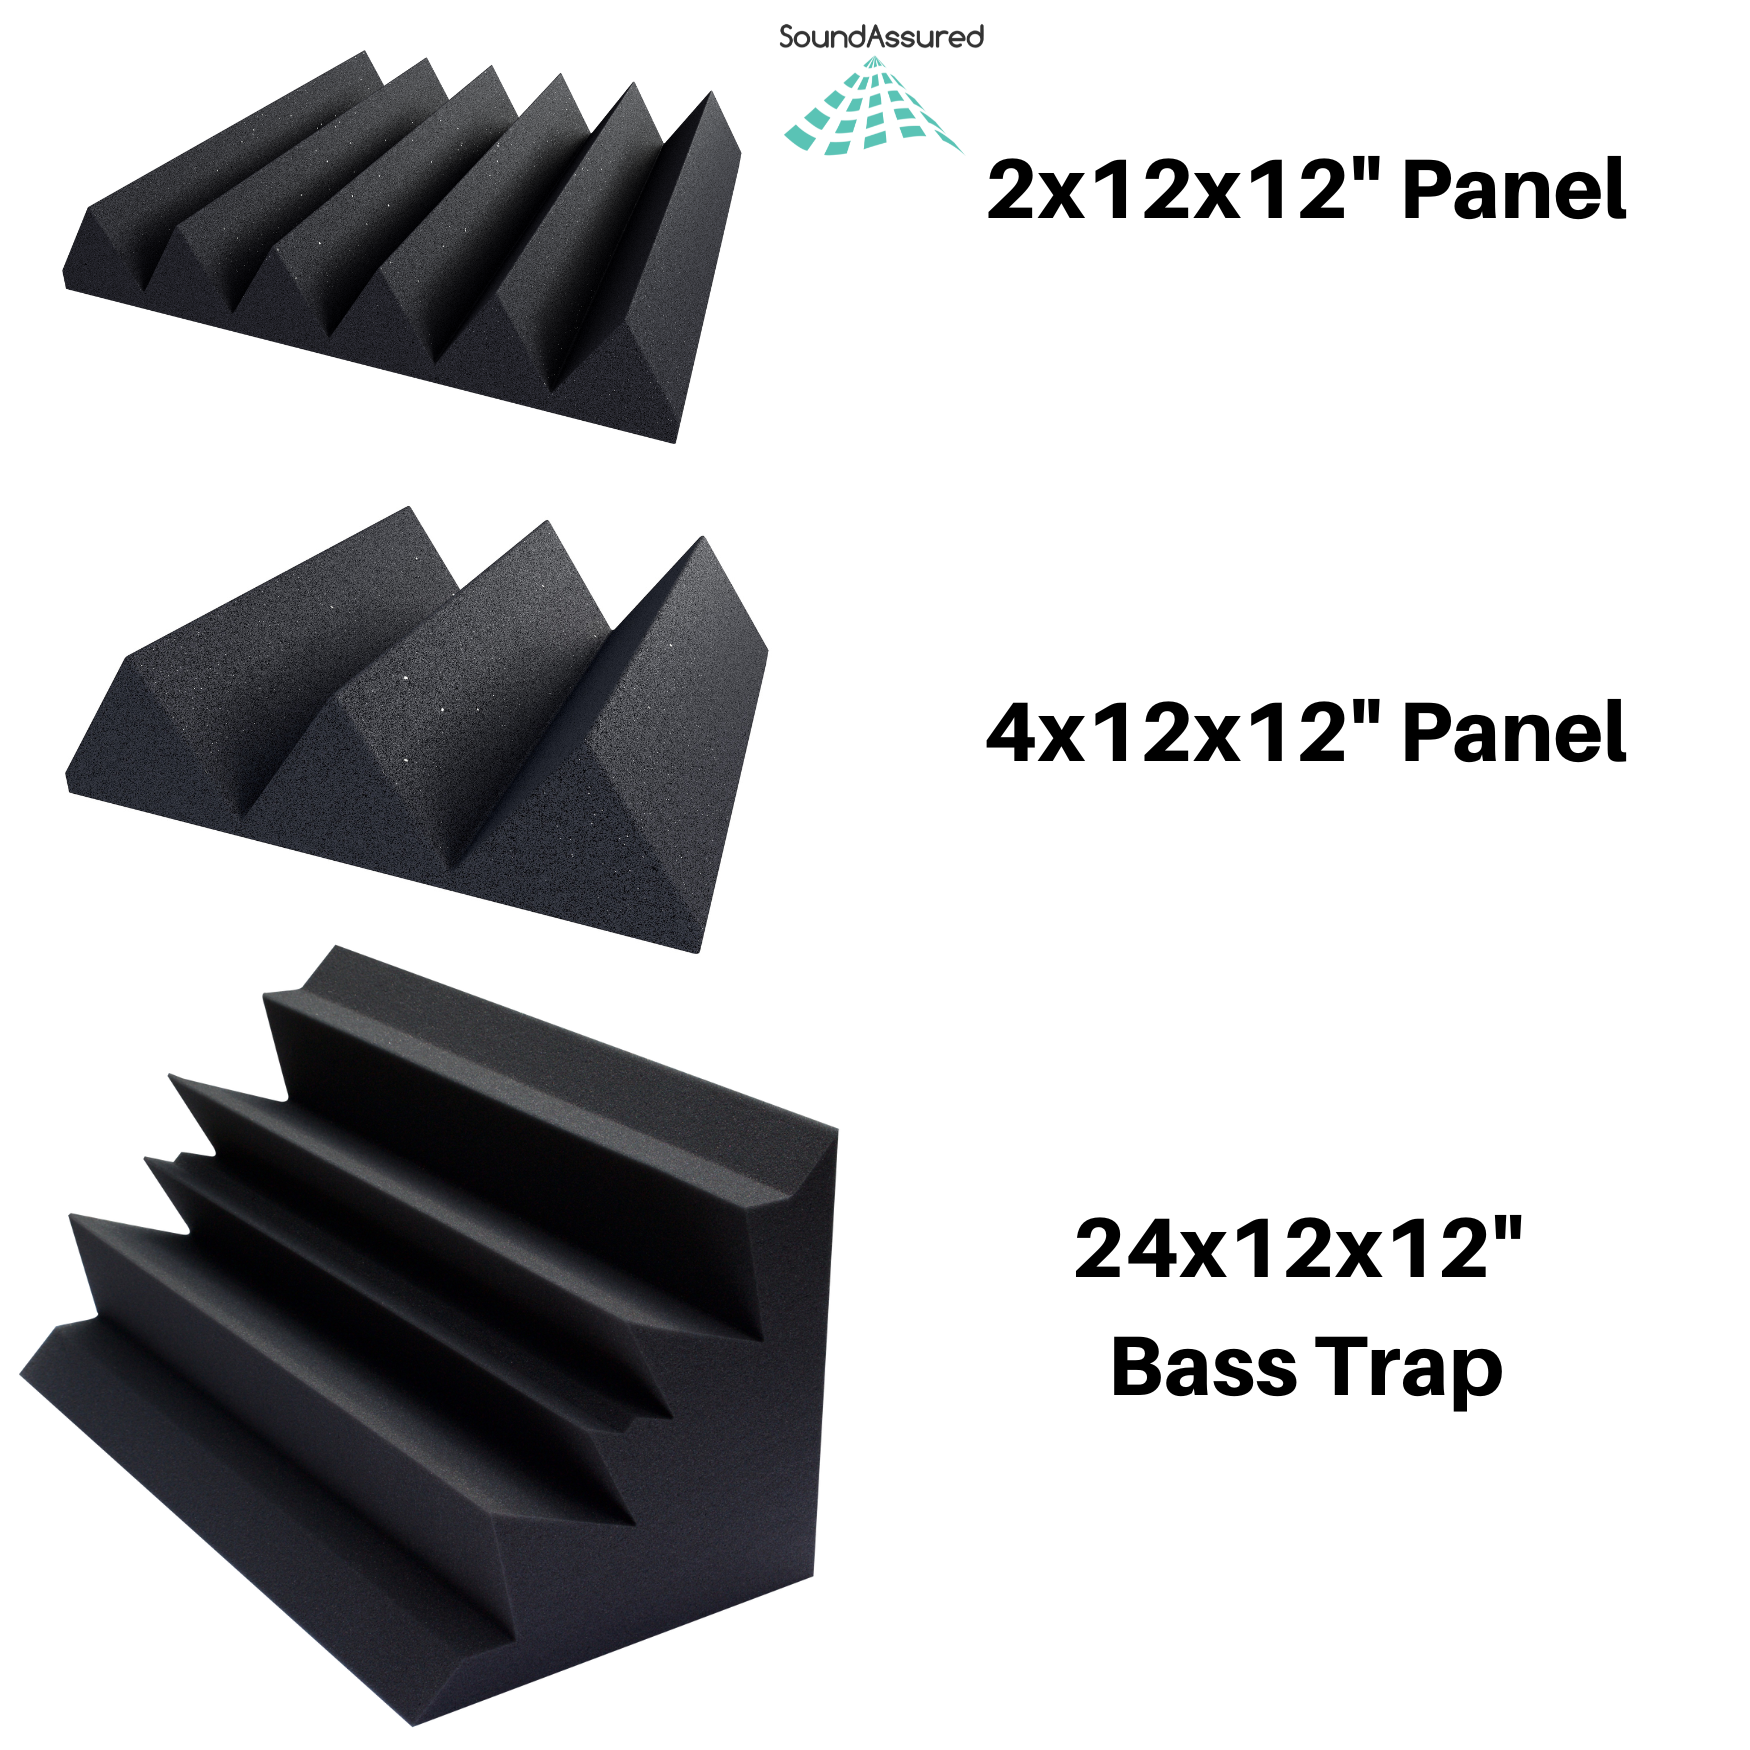 recording studio acoustic treatment bundles - this image shows the various sizes of panels that are included in the bundles - 12x12x2 inch wedge charcoal acoustic foam - 12x12x4 inch wedge style charcoal acoustic foam - 12x12x24 inch corner bass traps